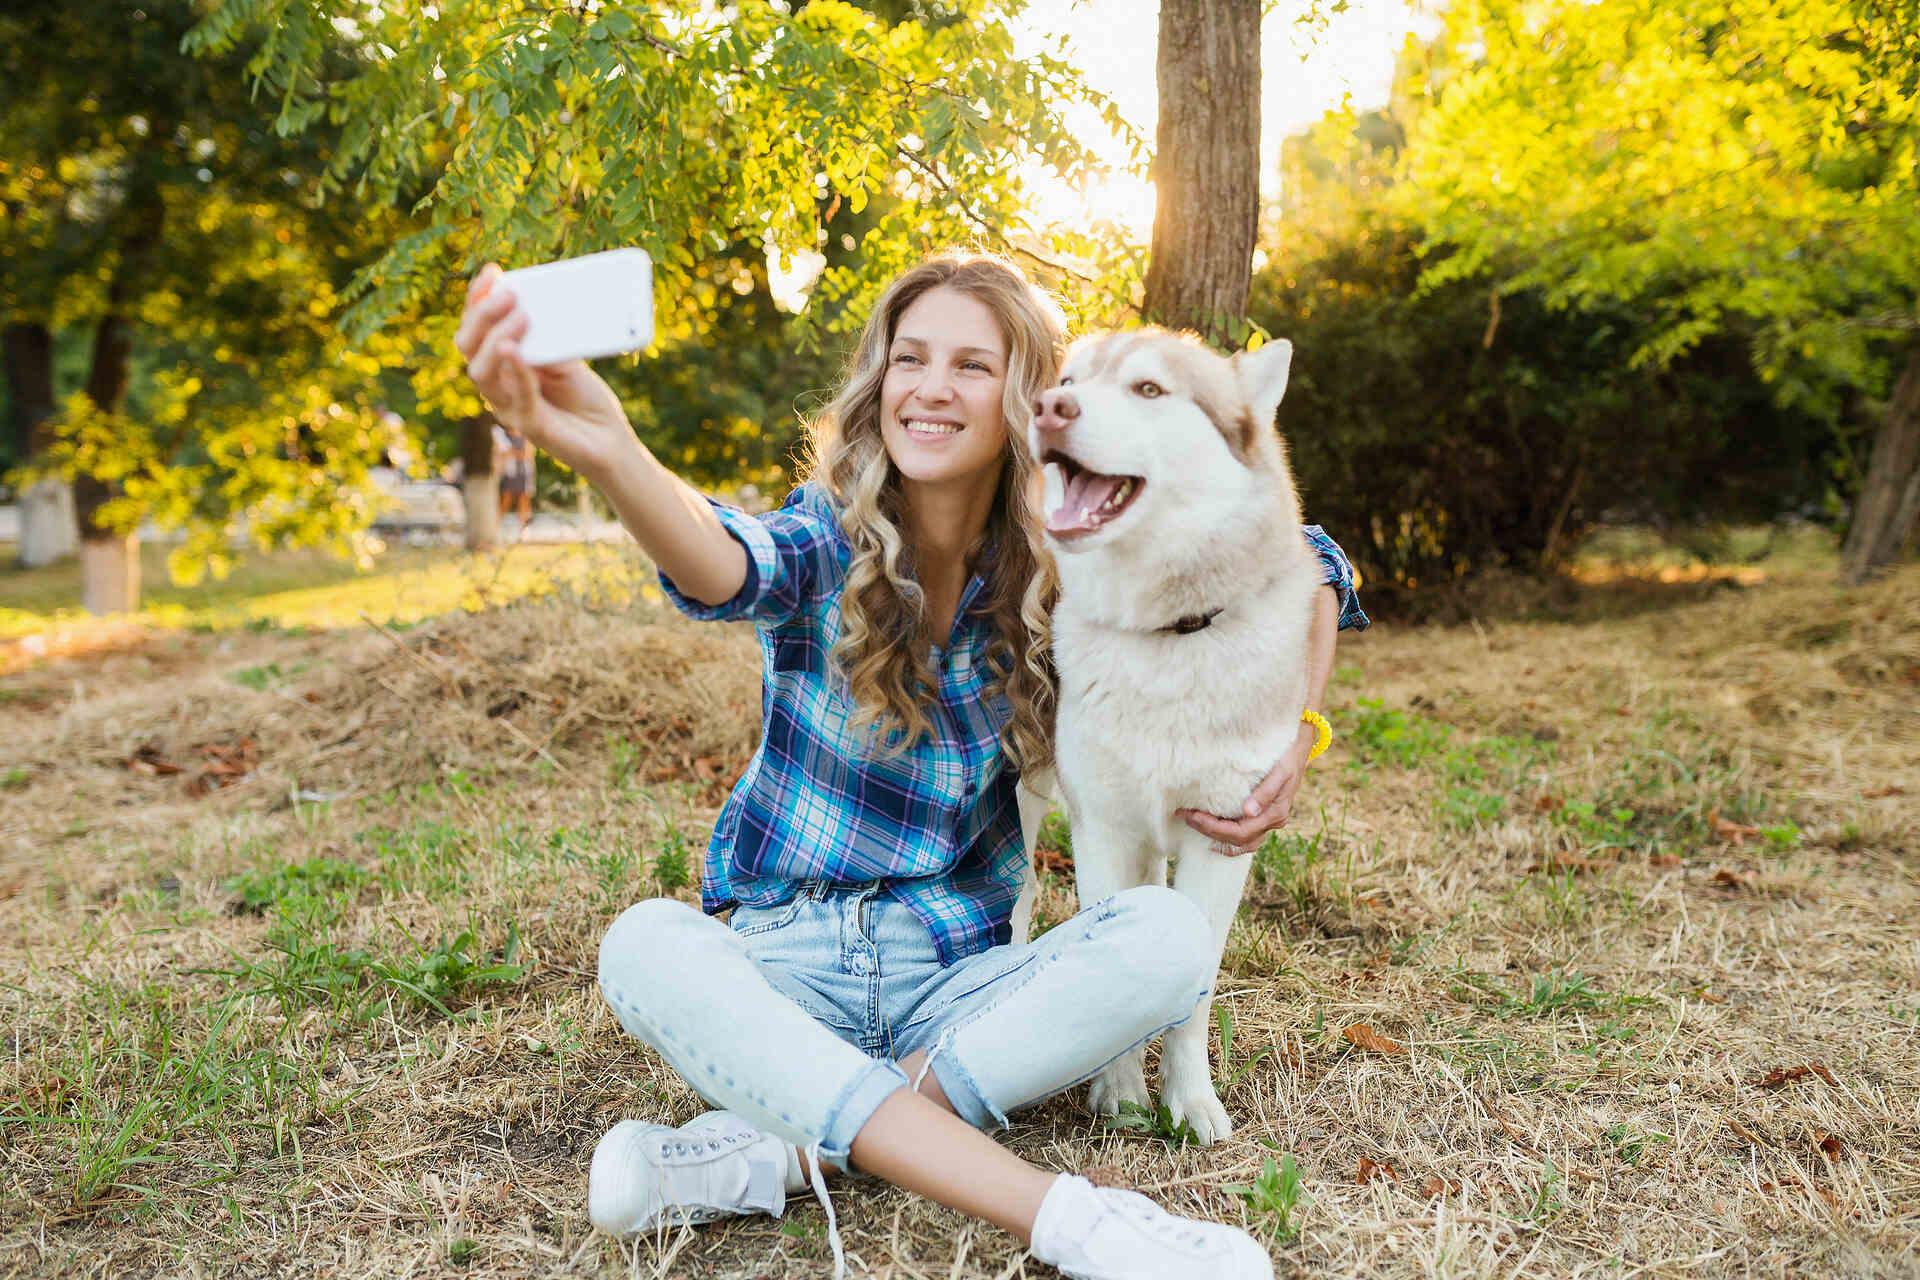 A woman taking a photo with her dog